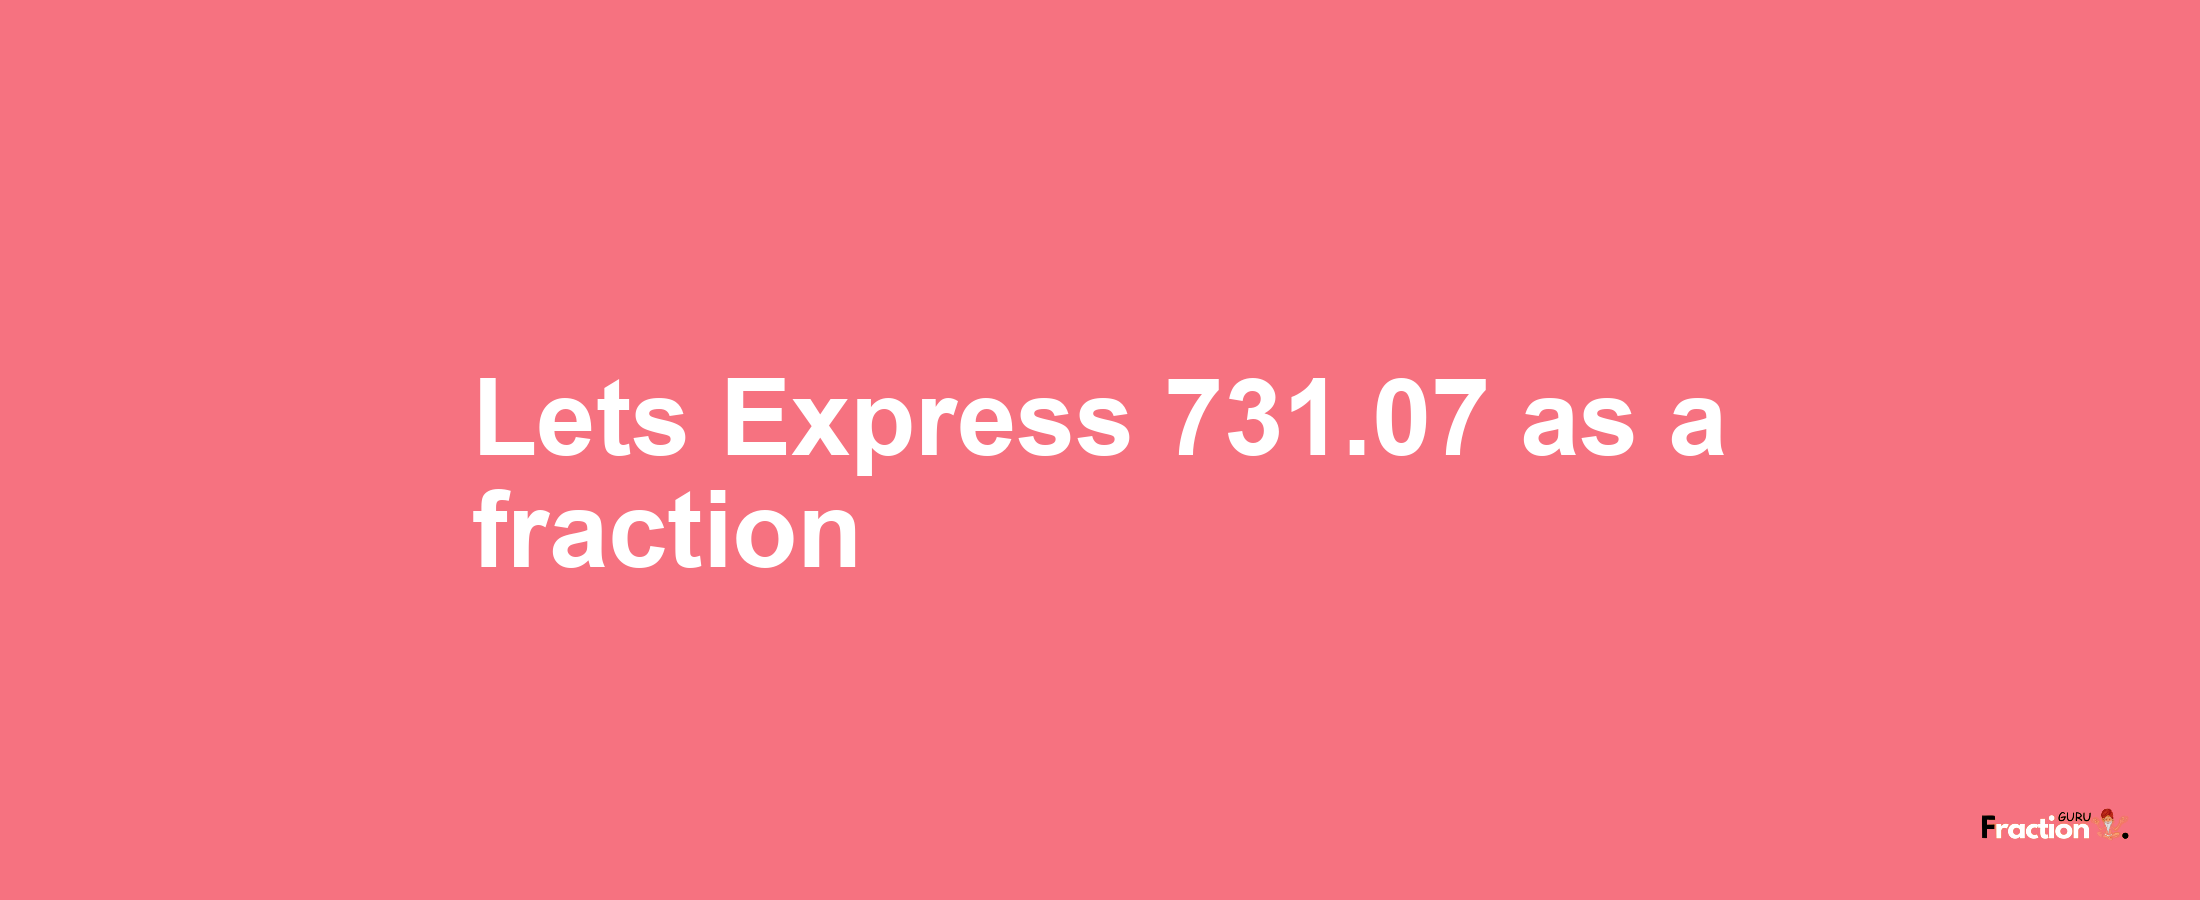 Lets Express 731.07 as afraction